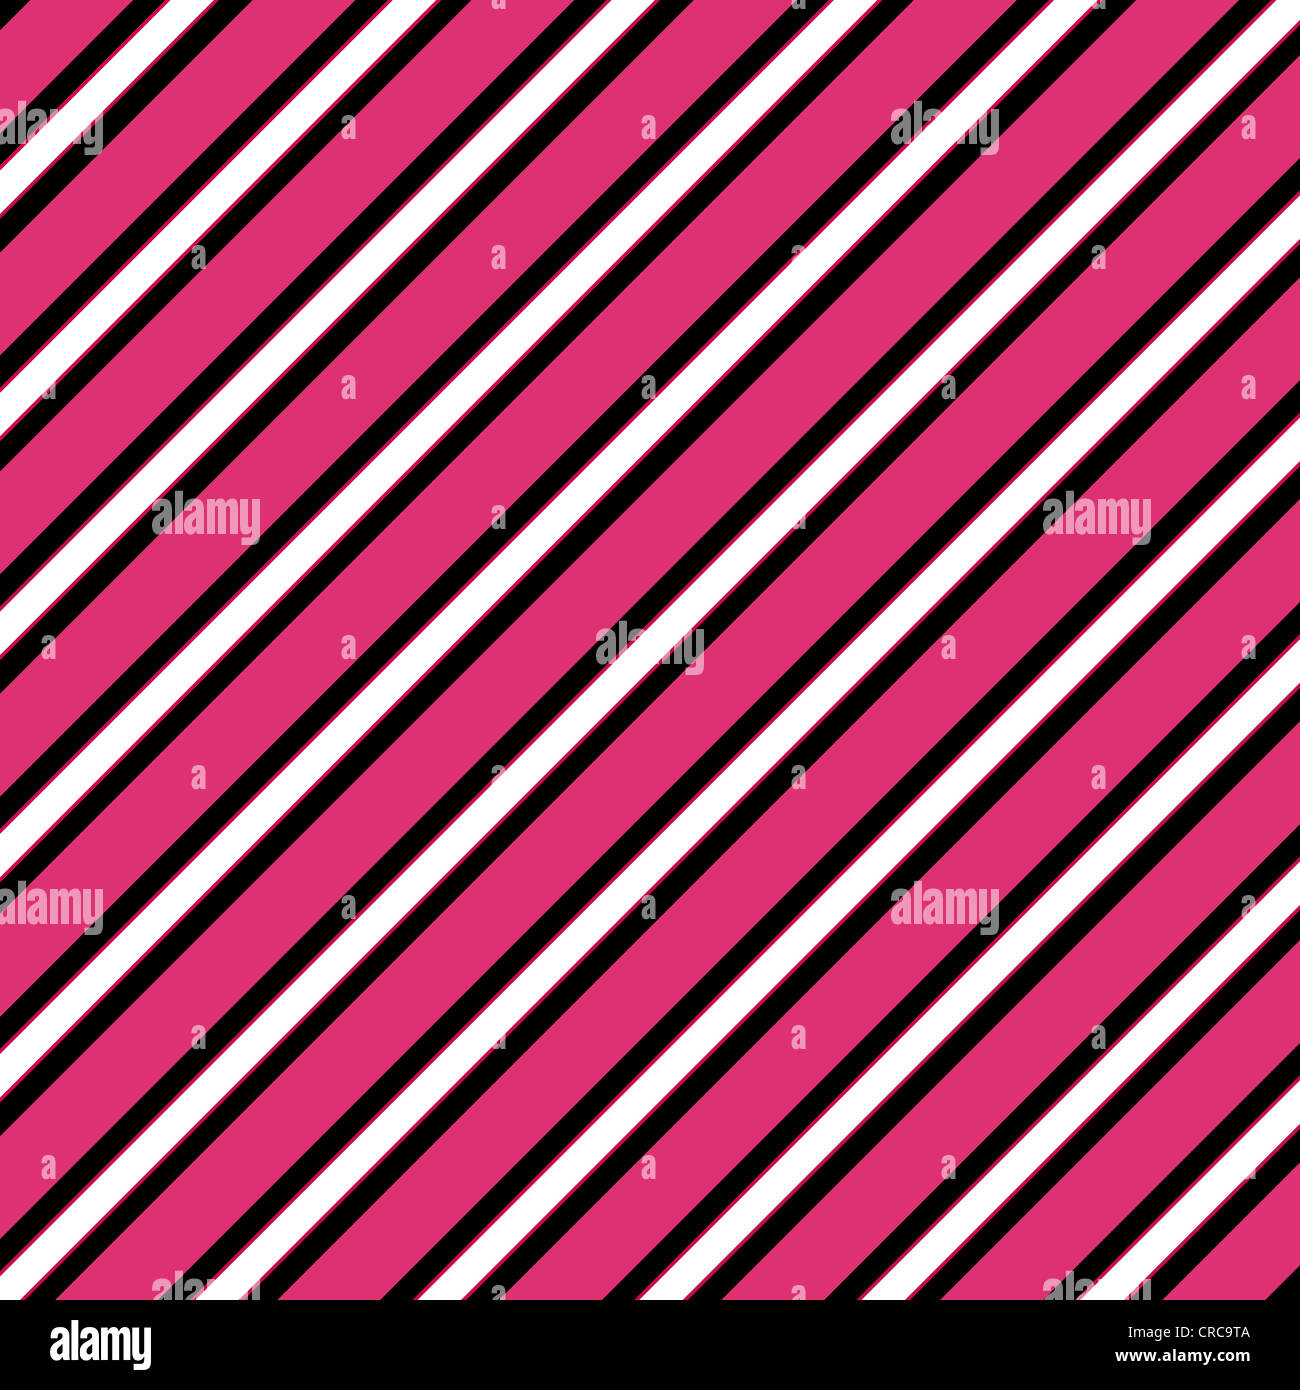 Diagonal stripes pattern in white, black and pink Stock Photo